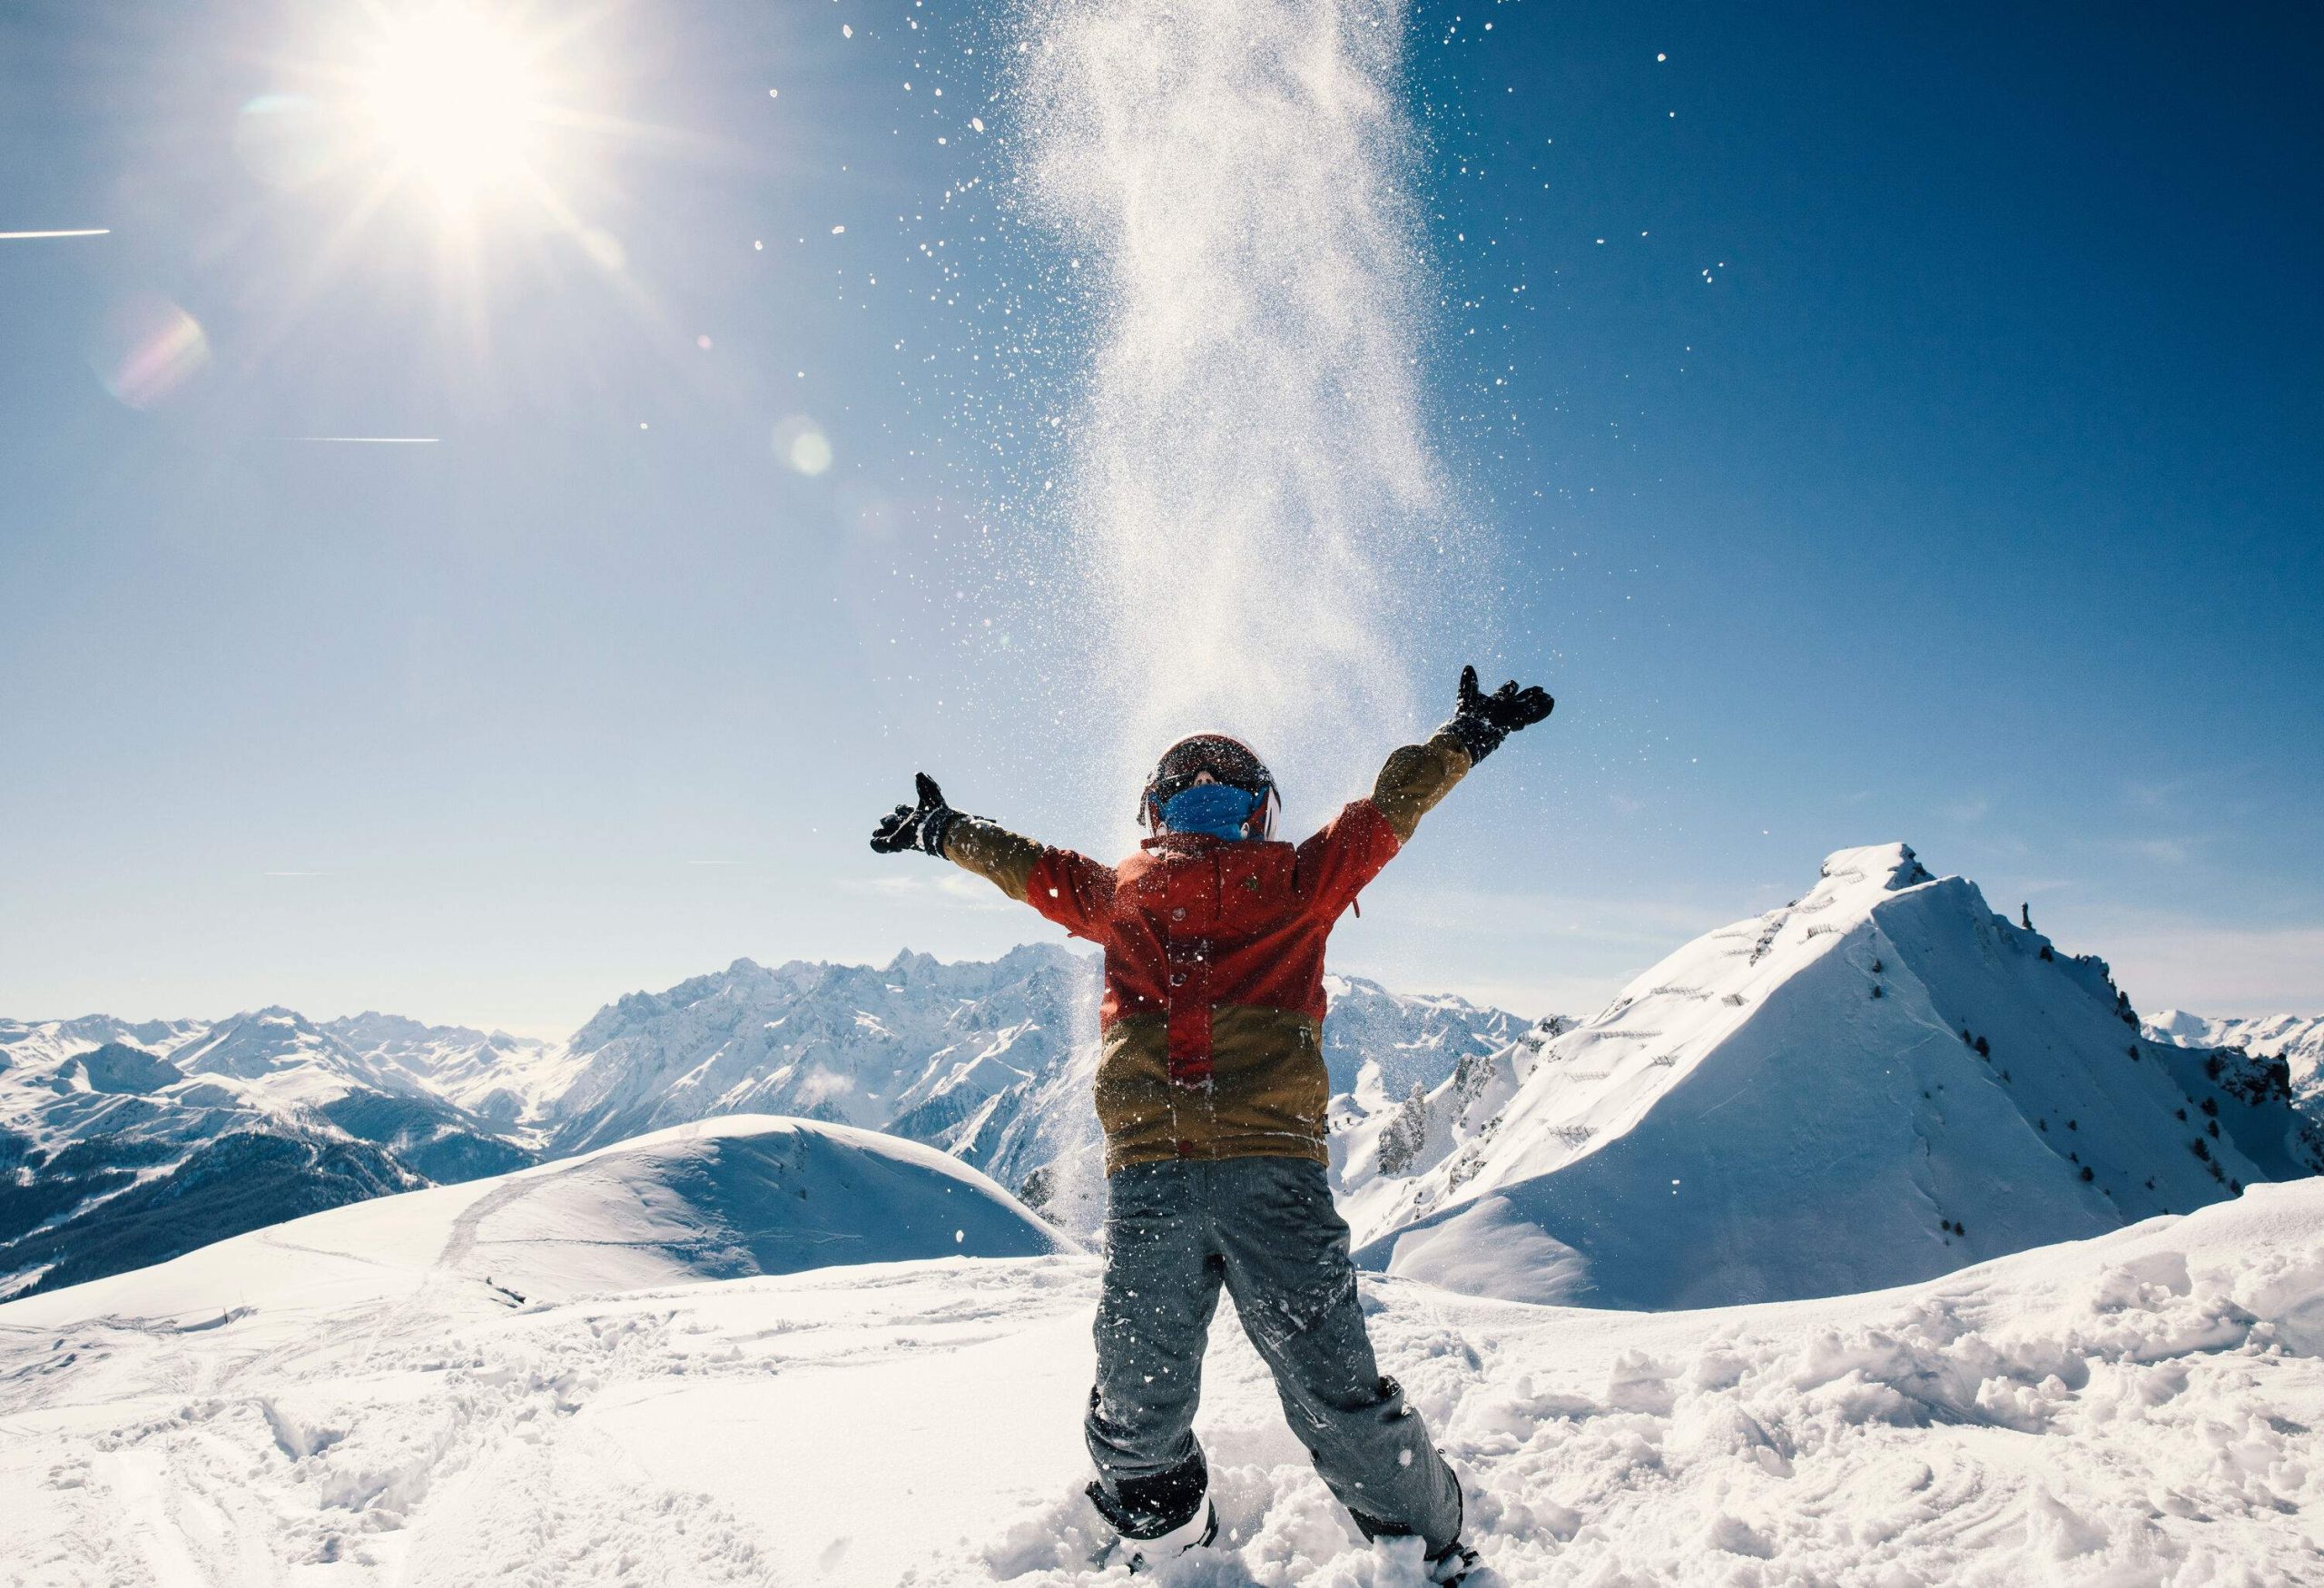 A young boy on a hilltop throwing snow in the air under bright sunlight.